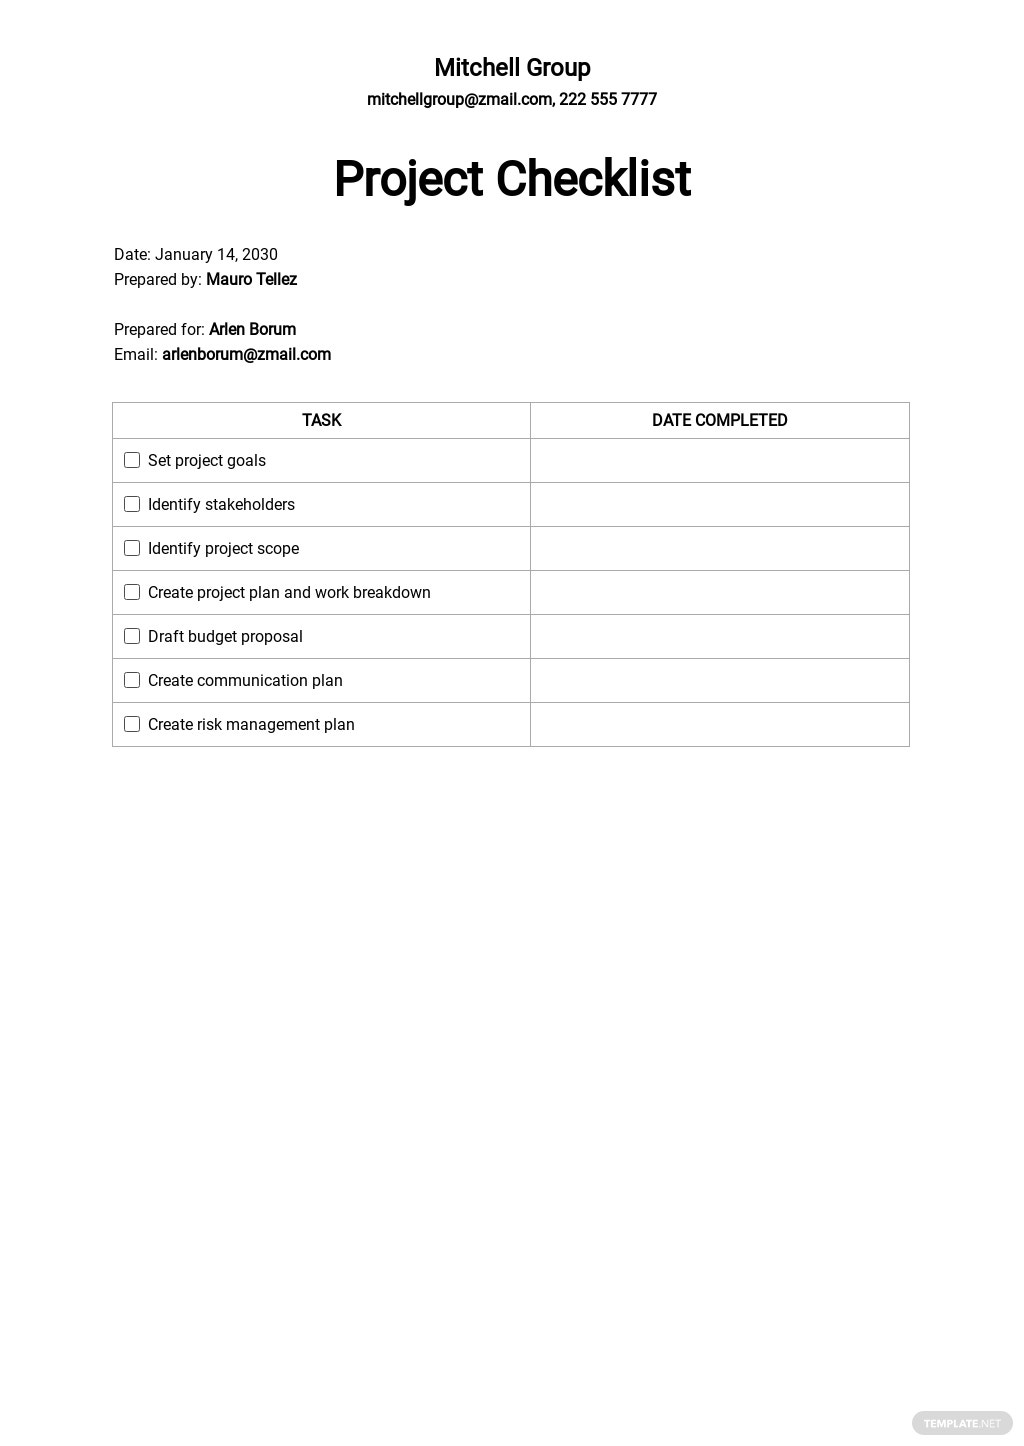 project-checklist-template